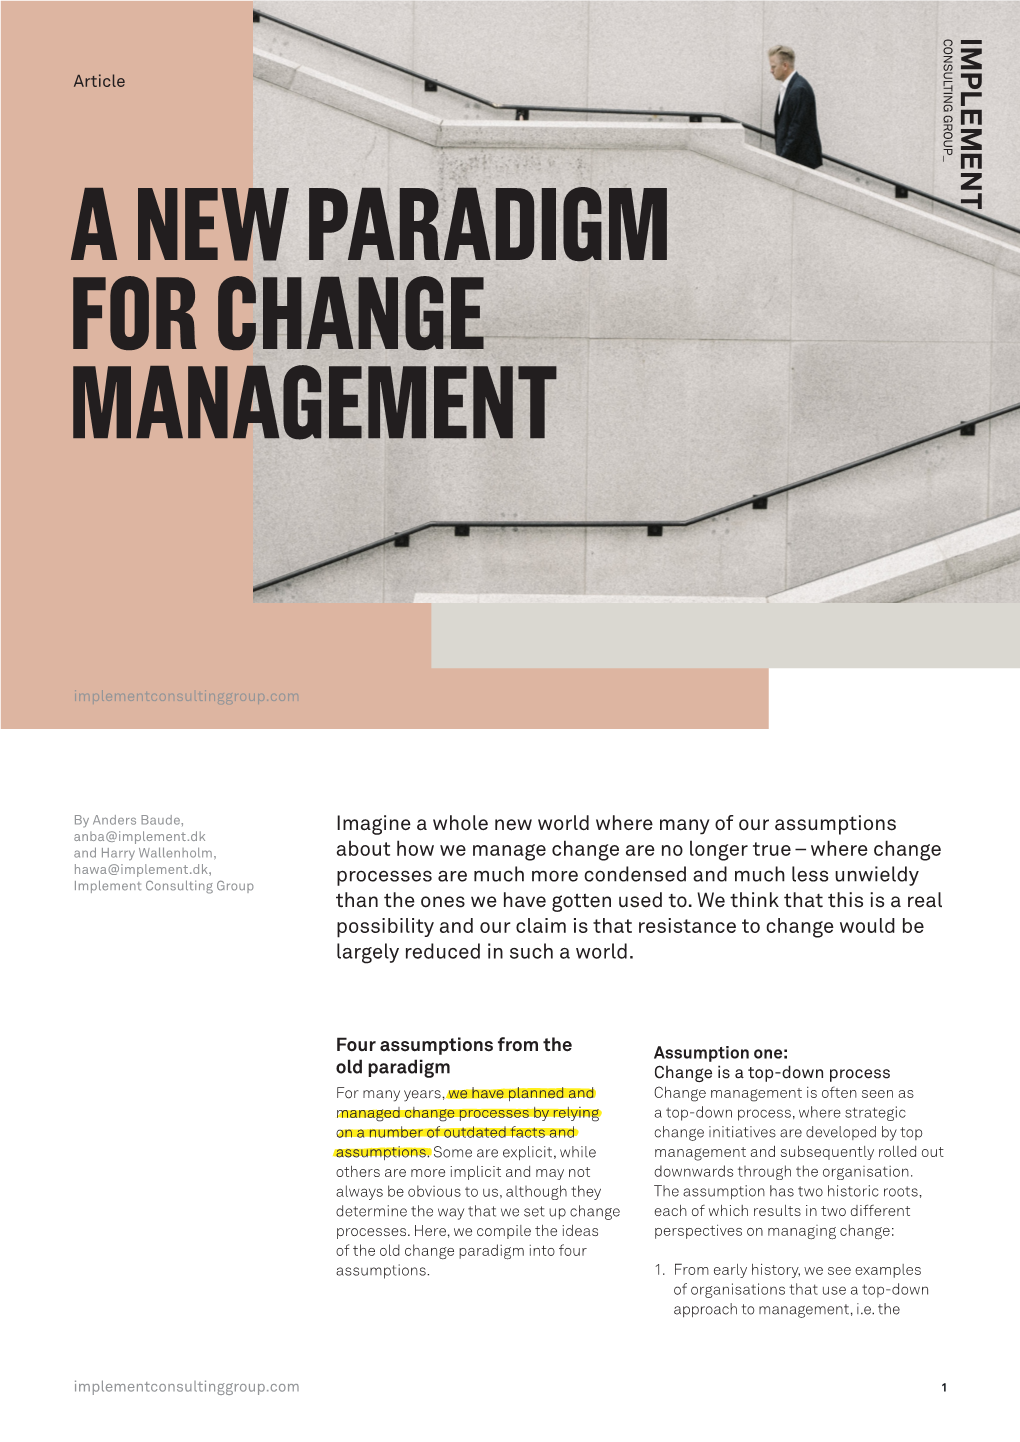 A New Paradigm for Change Management